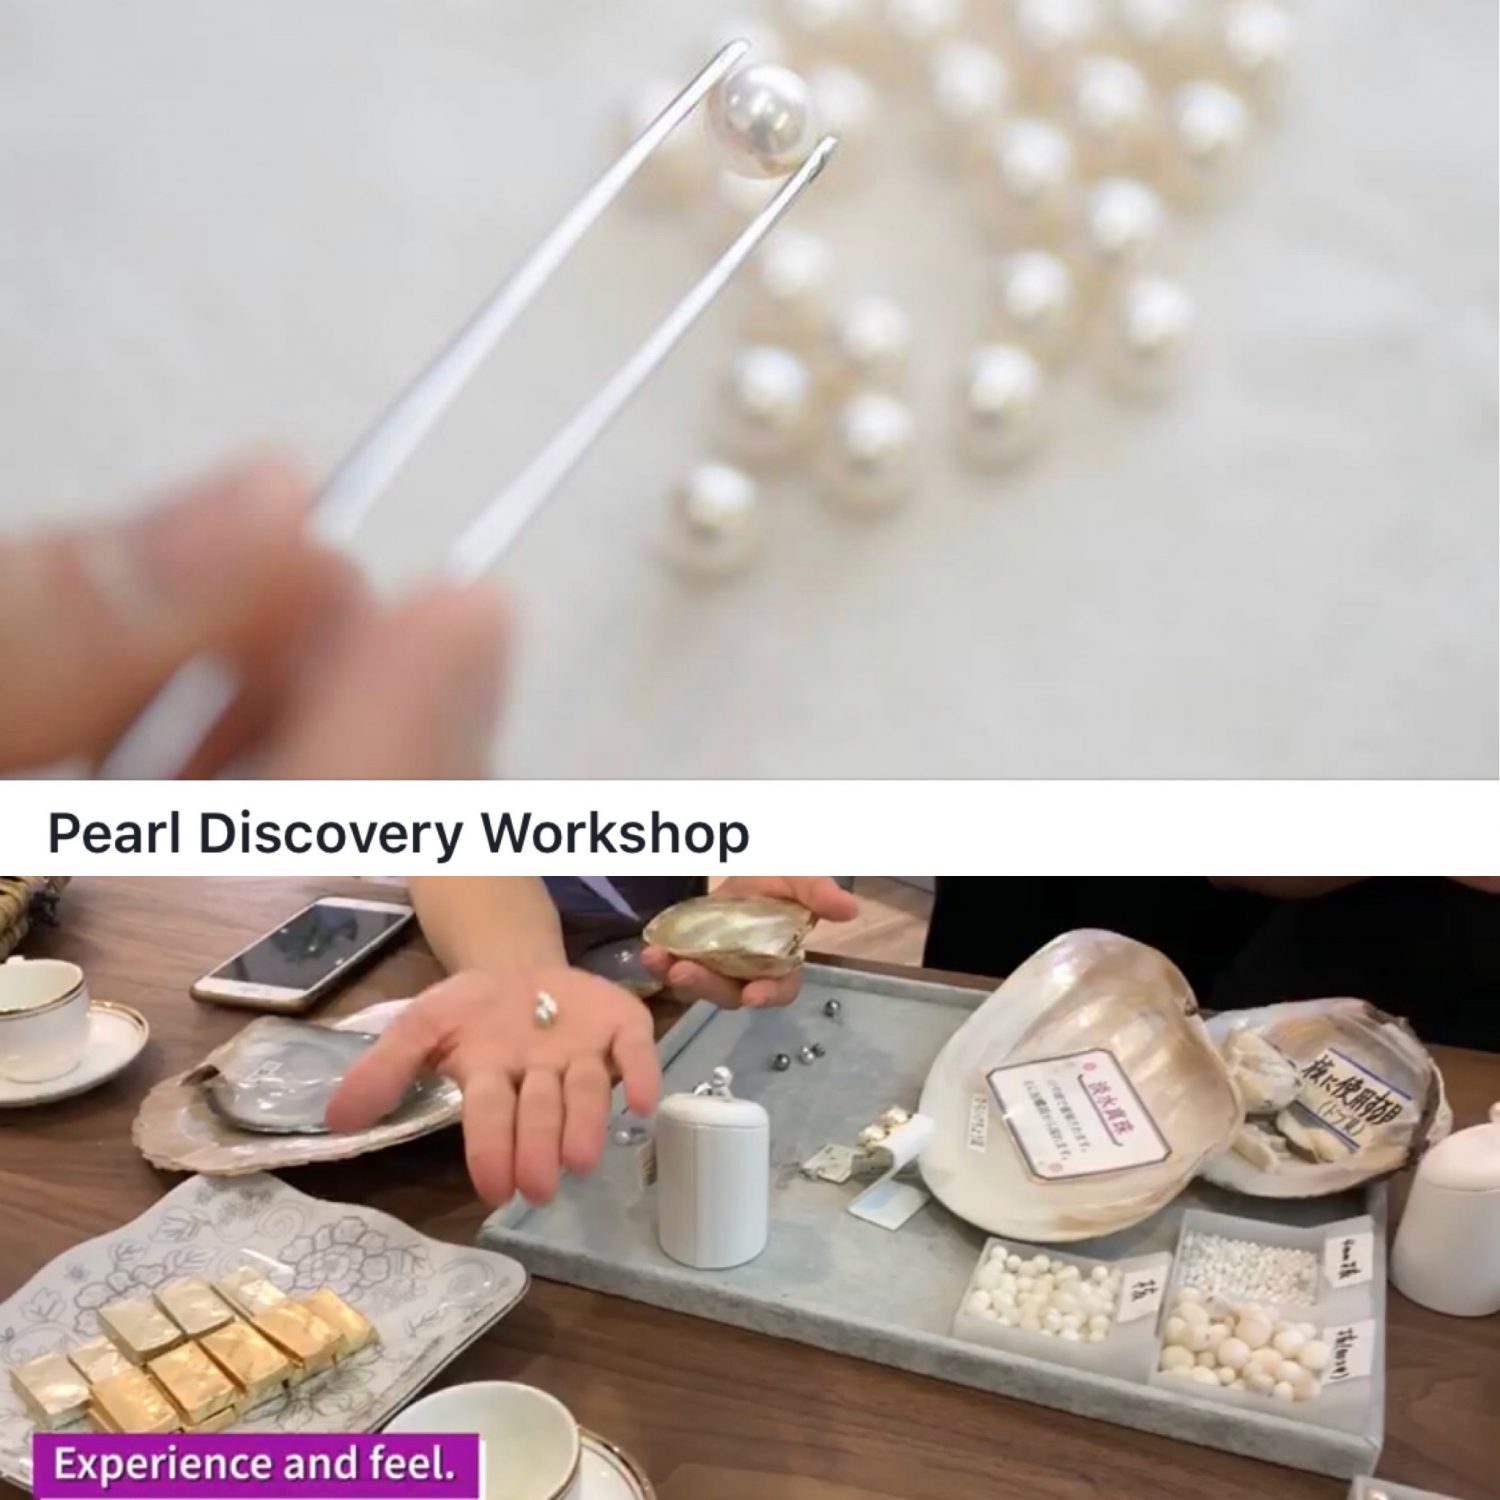 Pearl Discovery Workshop Start in Singapore シンガポールで真珠についてのWorkshop開始